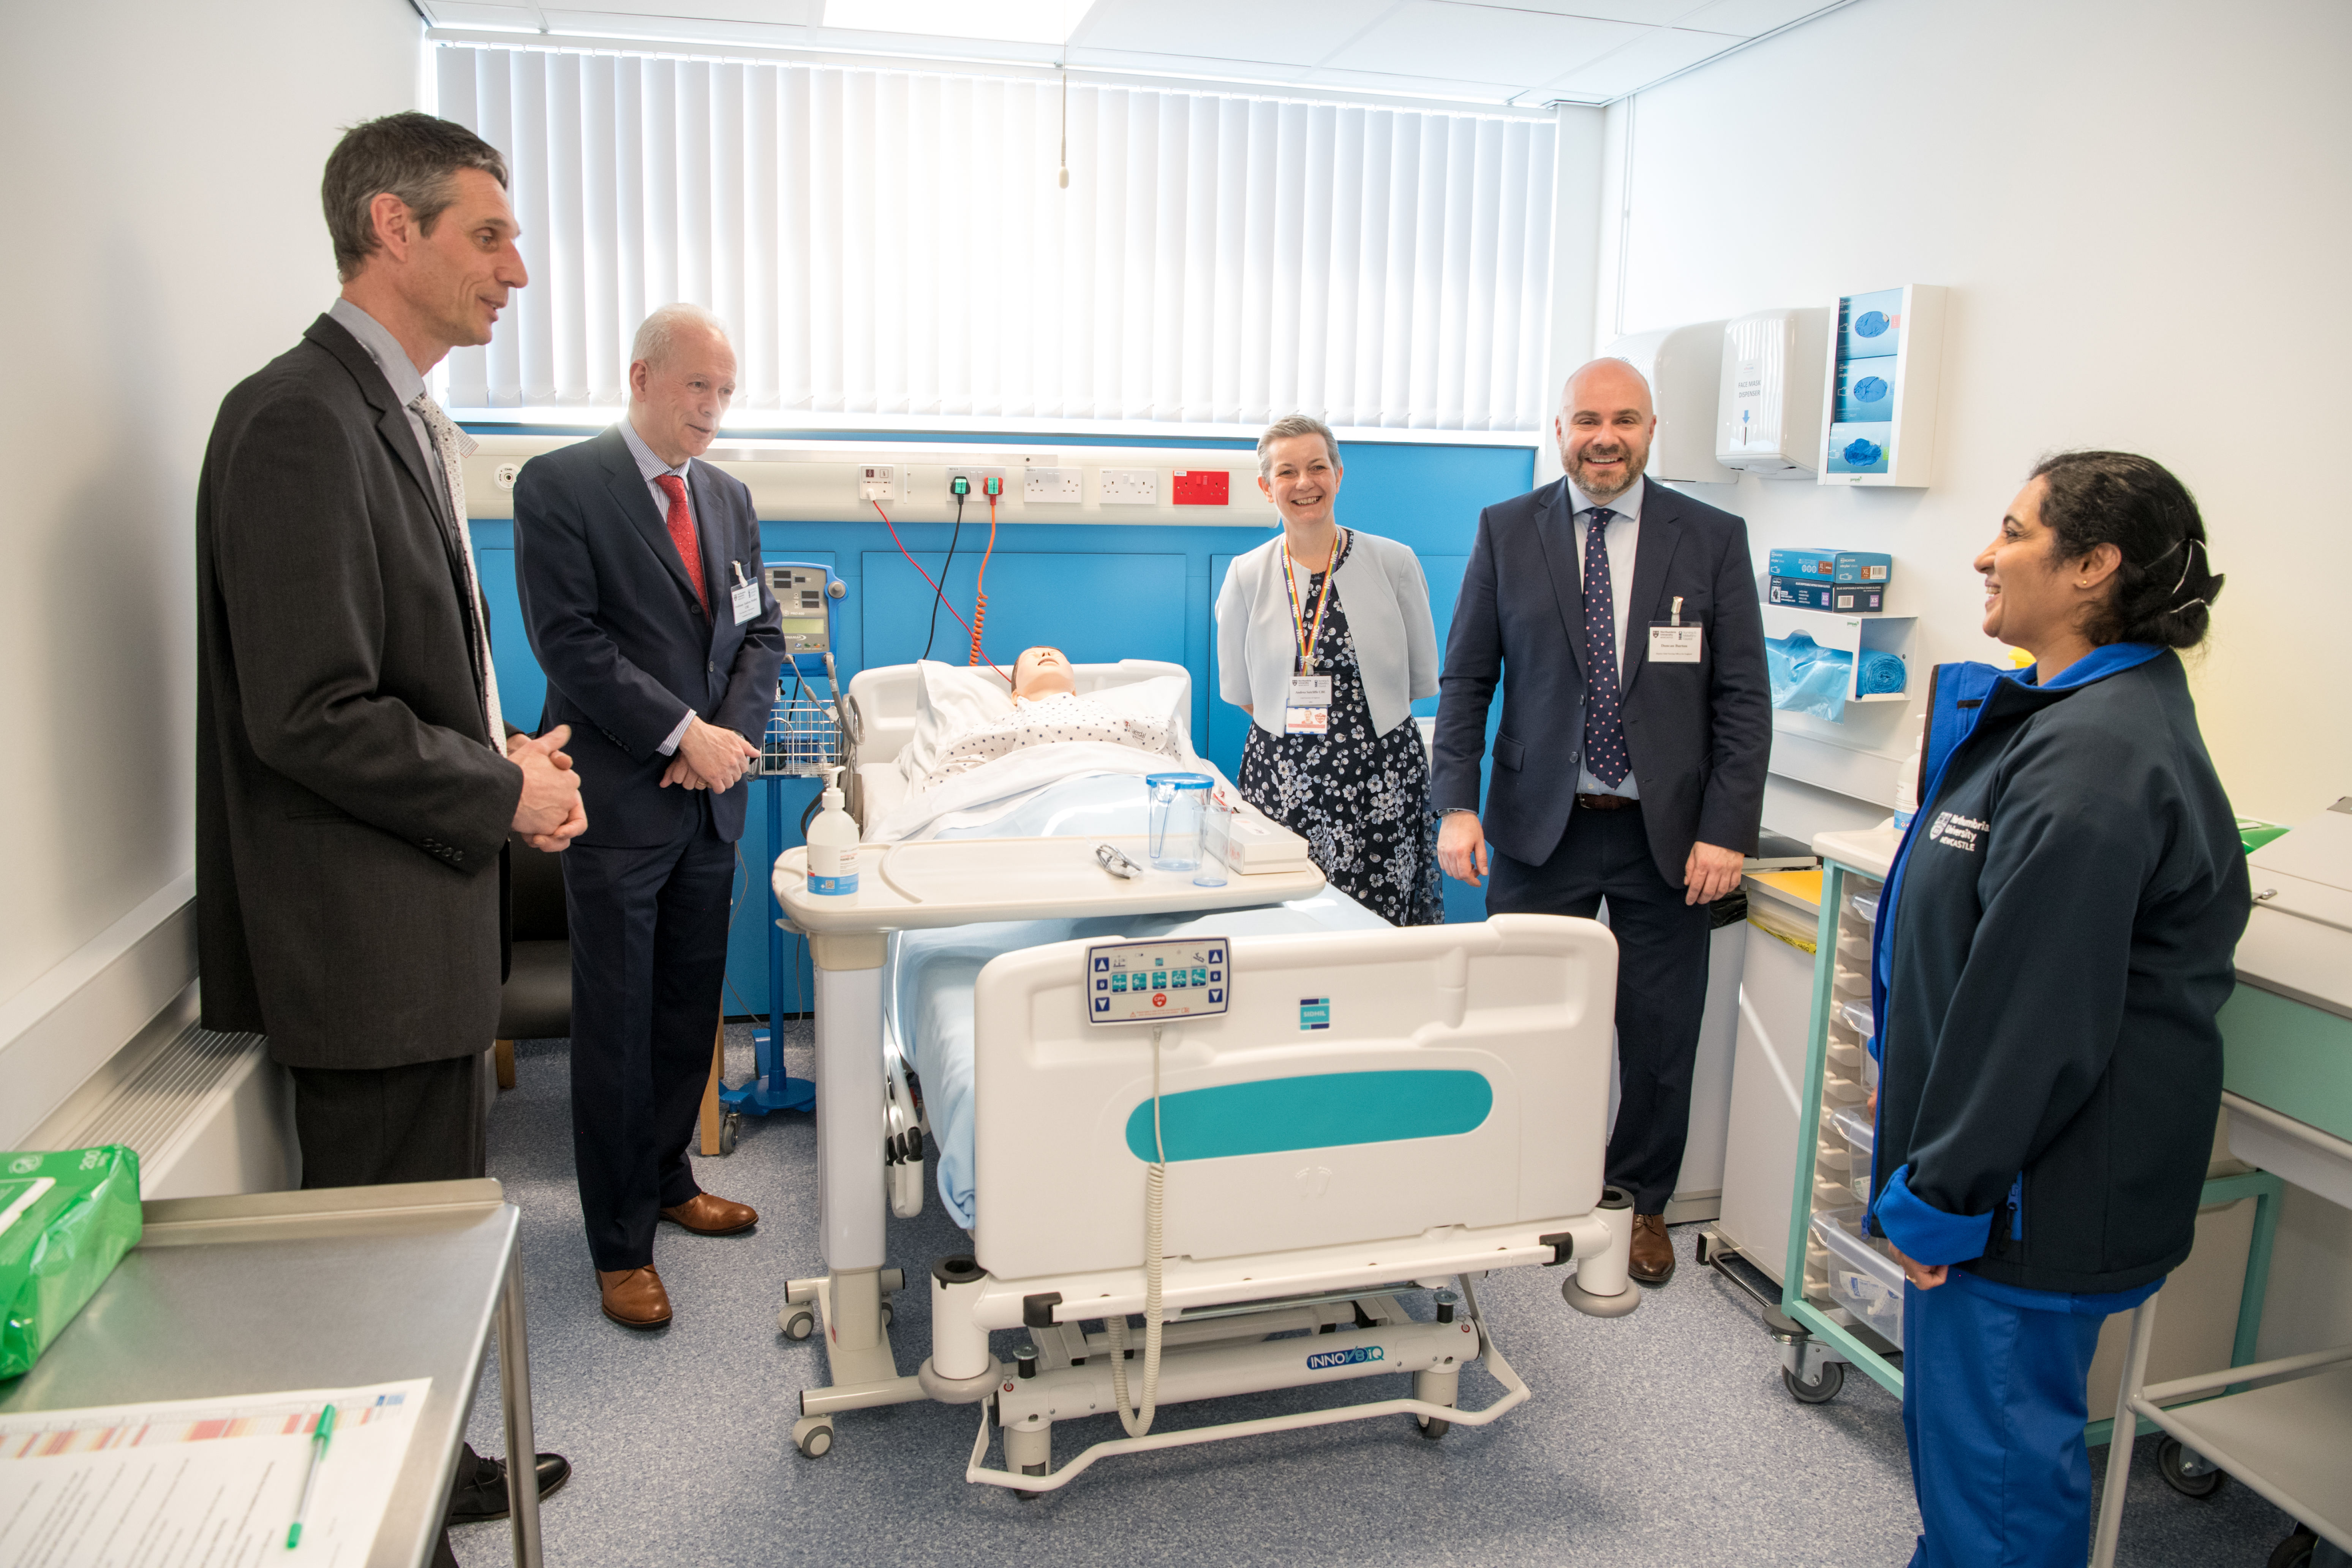 Andrea Sutcliffe and Duncan Burton on a tour of the NMC Competence Test Centre at Northumbria University